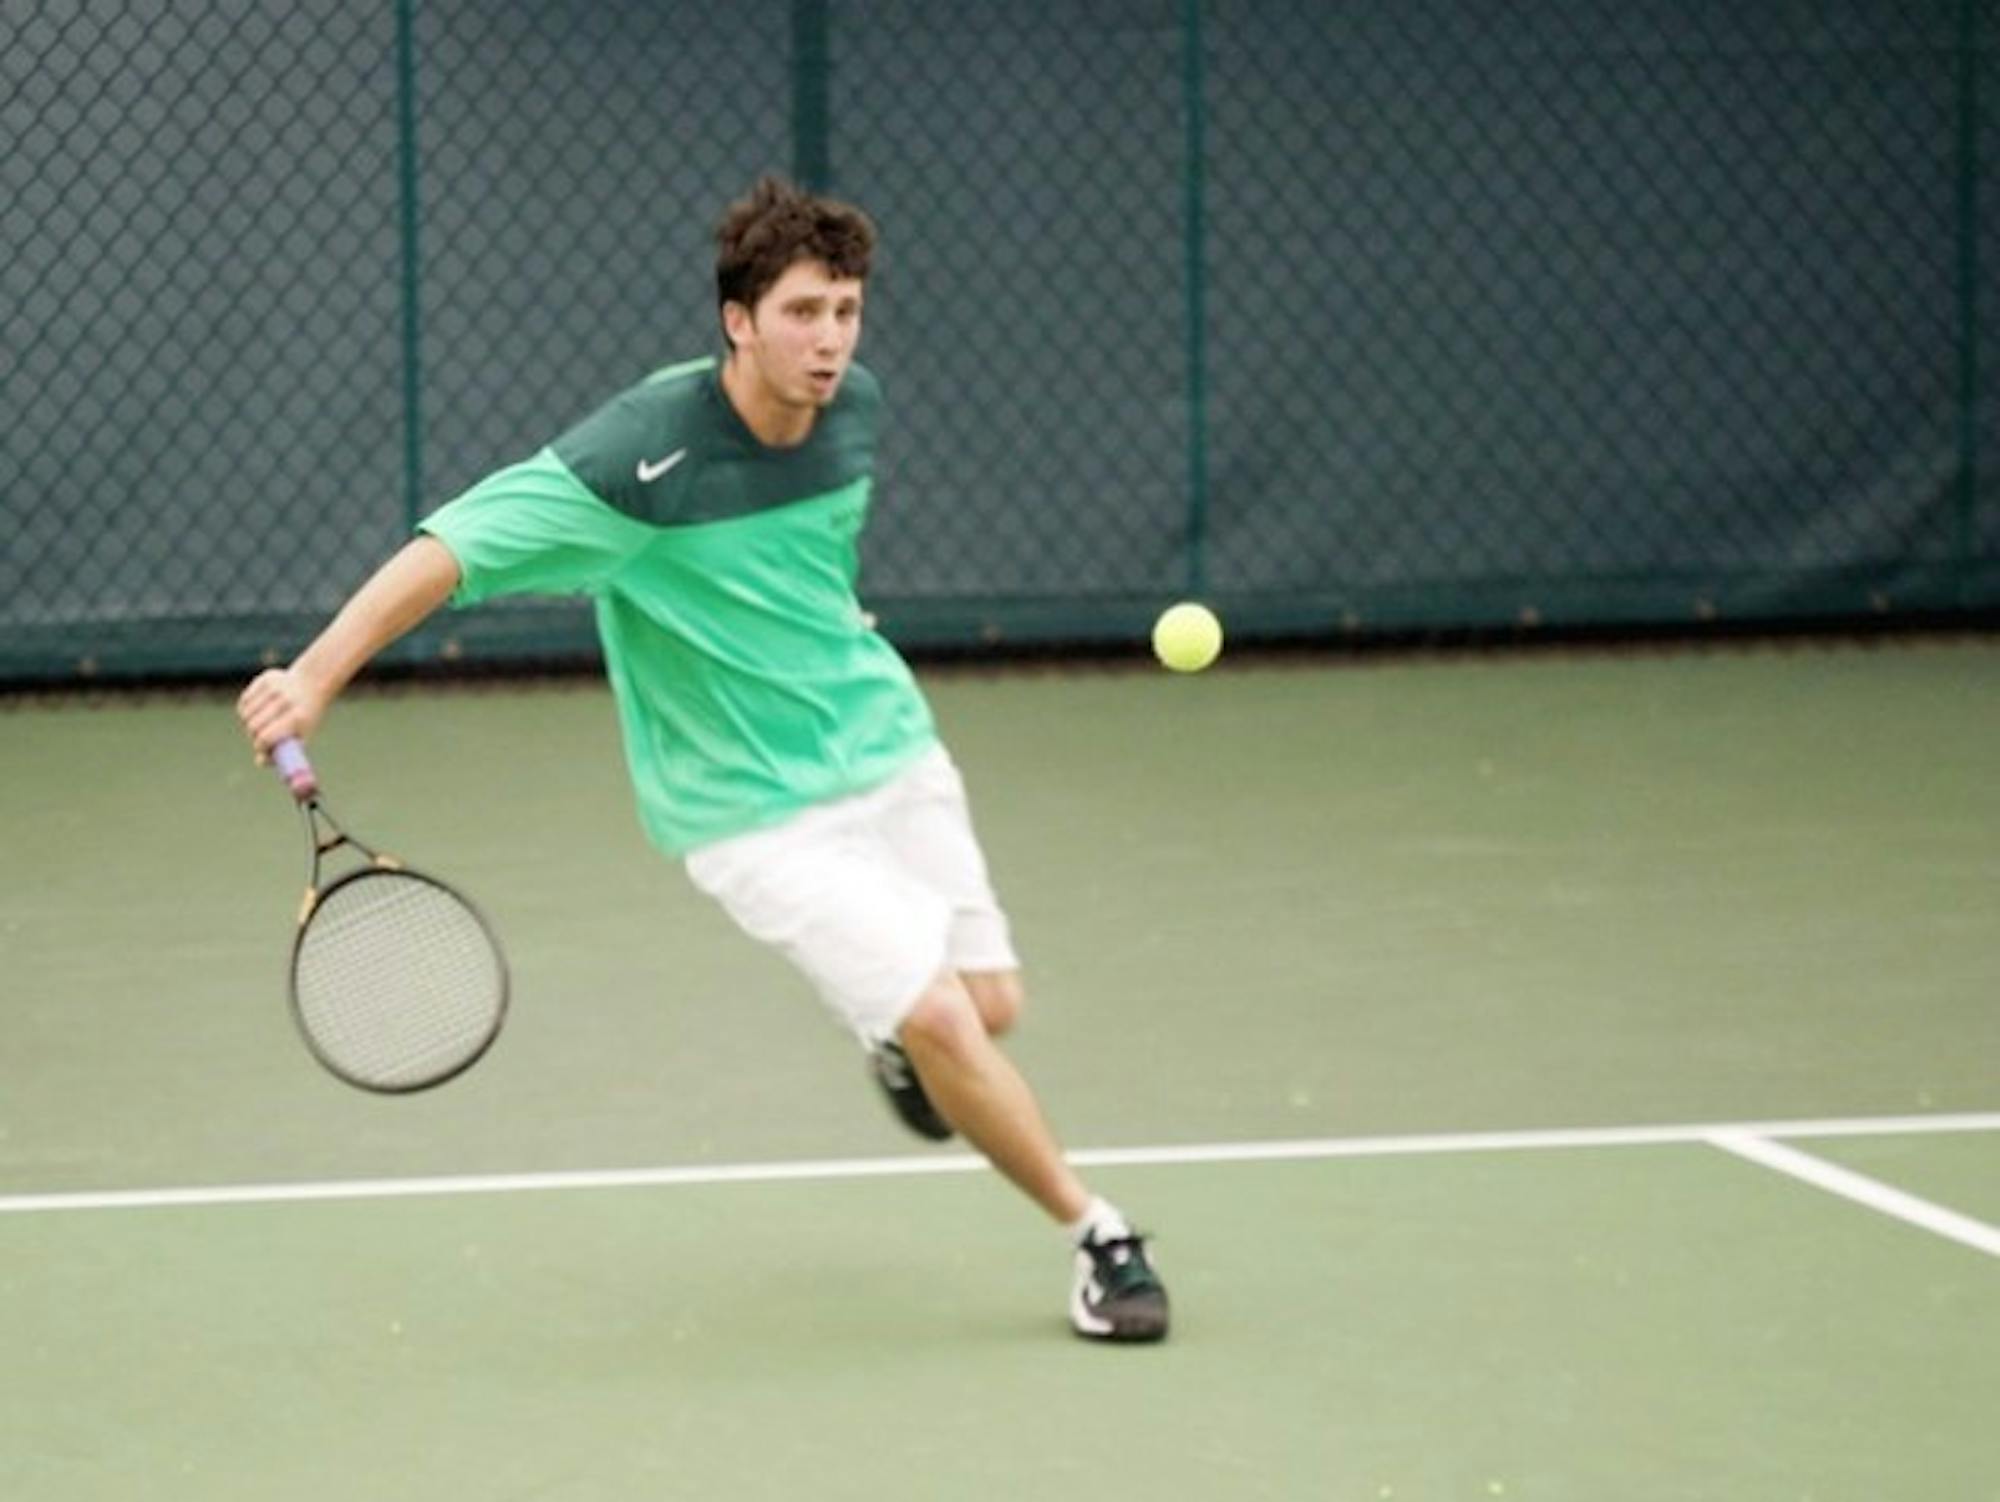 At No. 2 singles, Jeff Schechtman '08 earned Dartmouth's lone team point in an otherwise frustrating weekend for the men's tennis team.